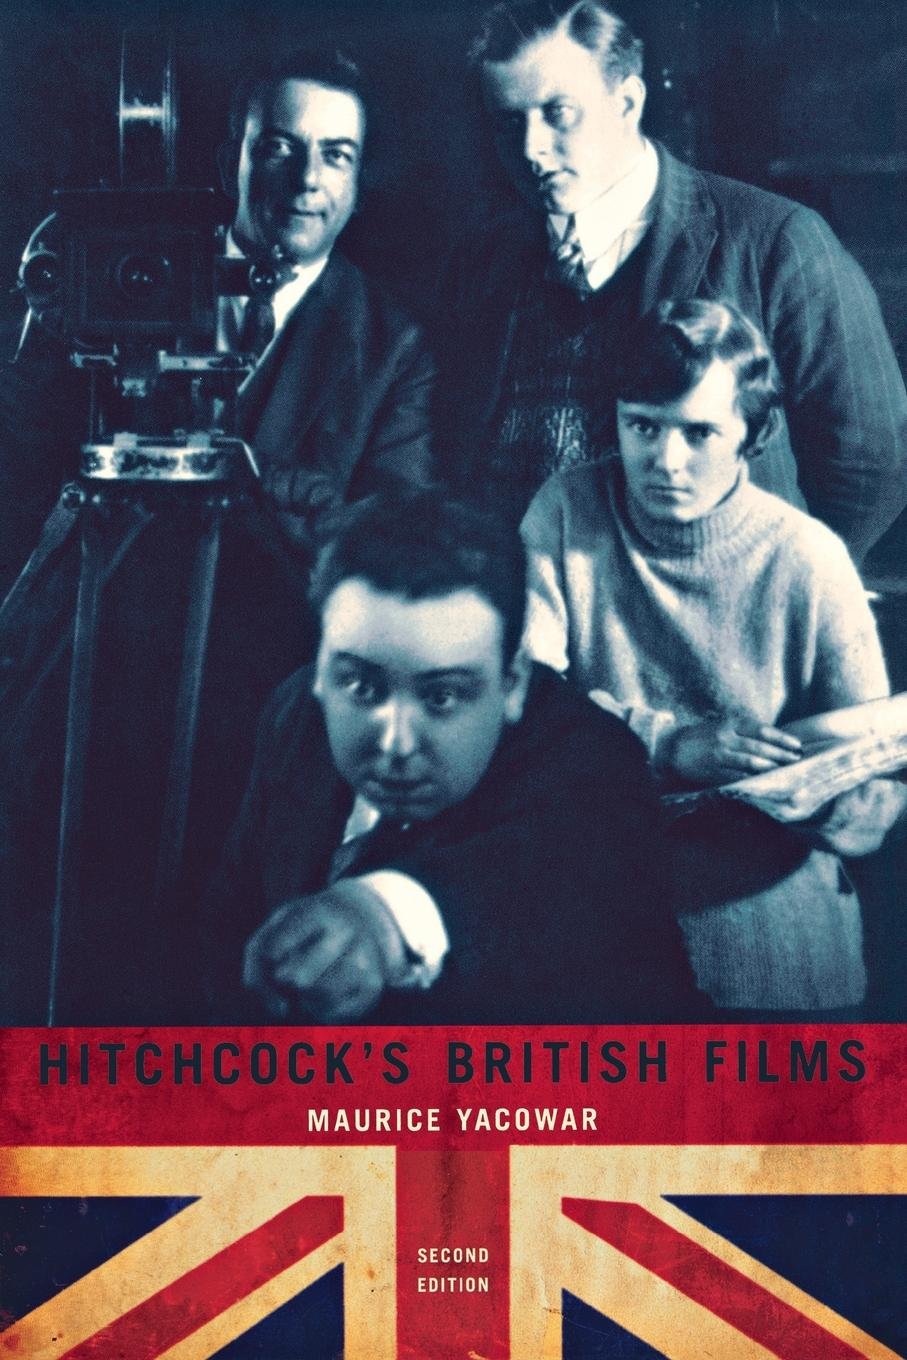 Alfred Hitchcock's British Films (1977, 2010) by Maurice Yacowar